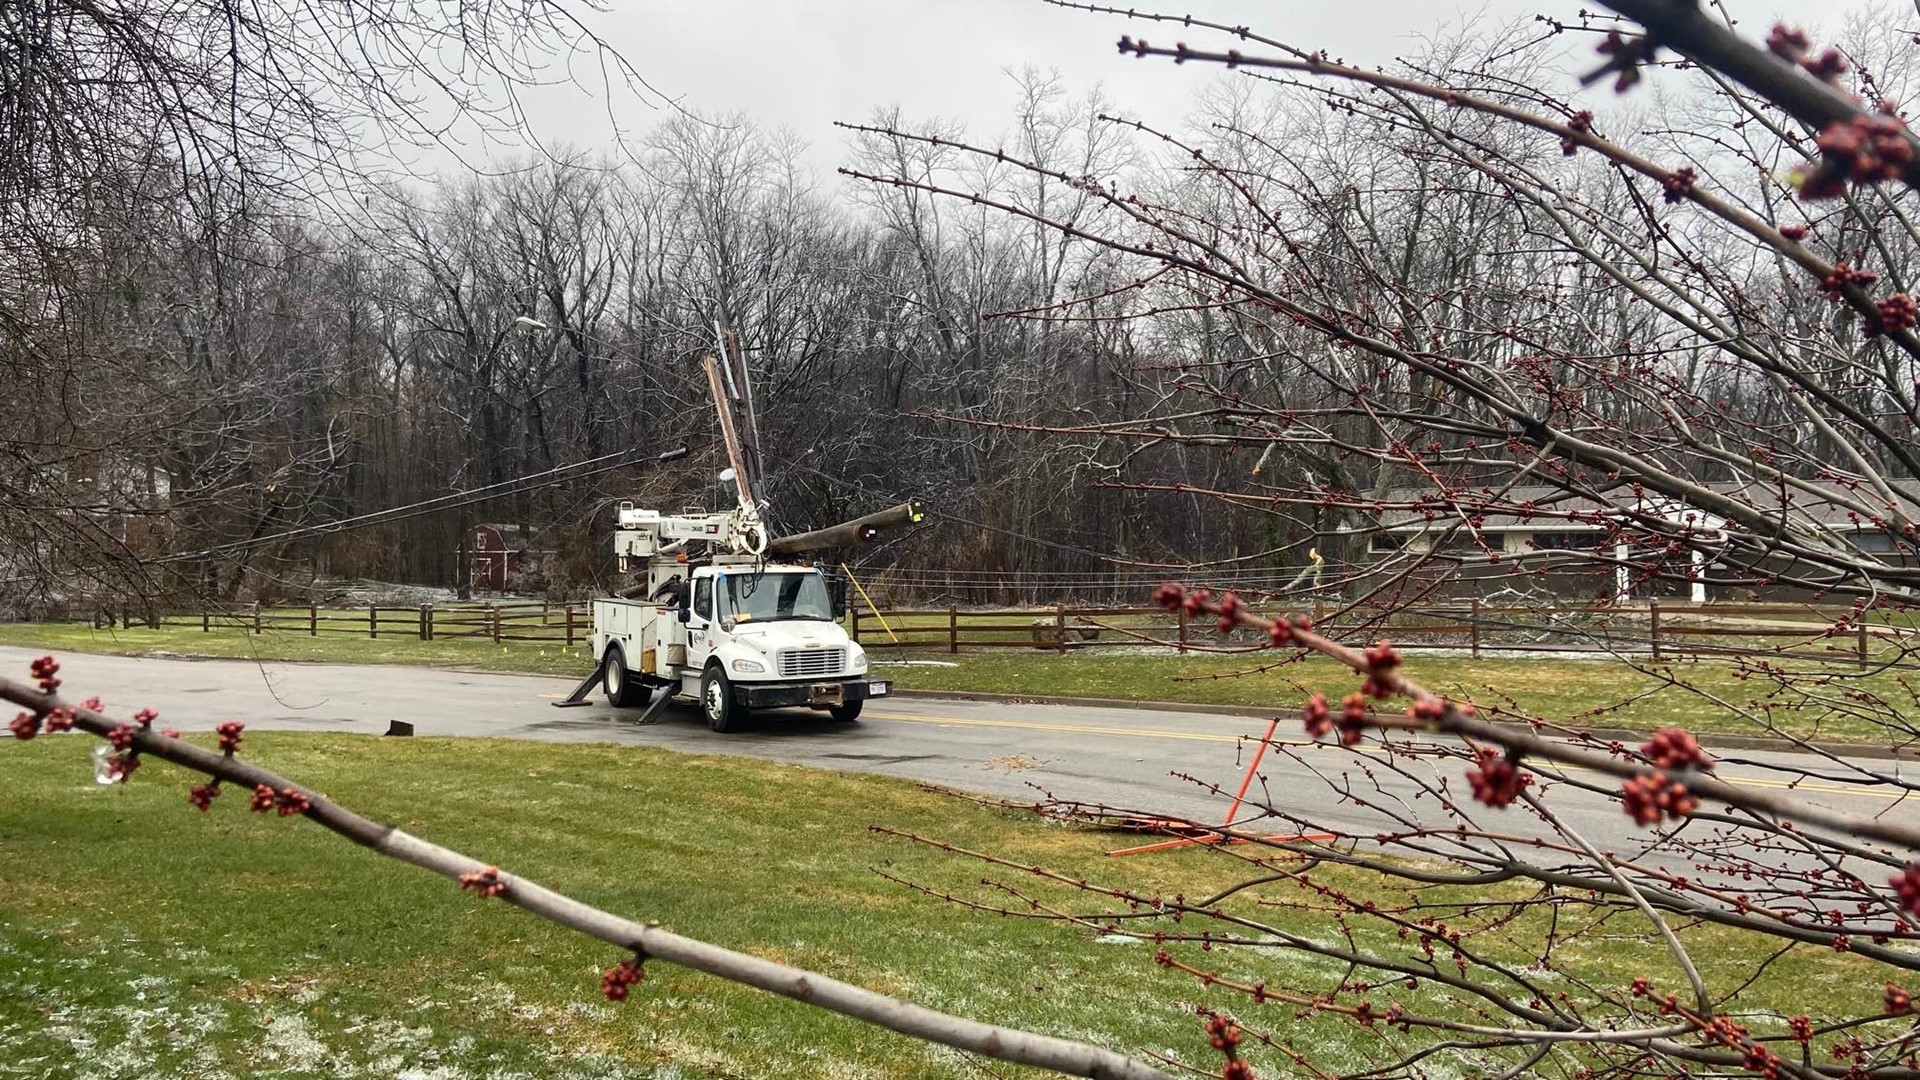 The American Red Cross in Kalamazoo opened up a 24-hour shelter Thursday evening as the community continues cleanup and power restoration efforts after the ice storm